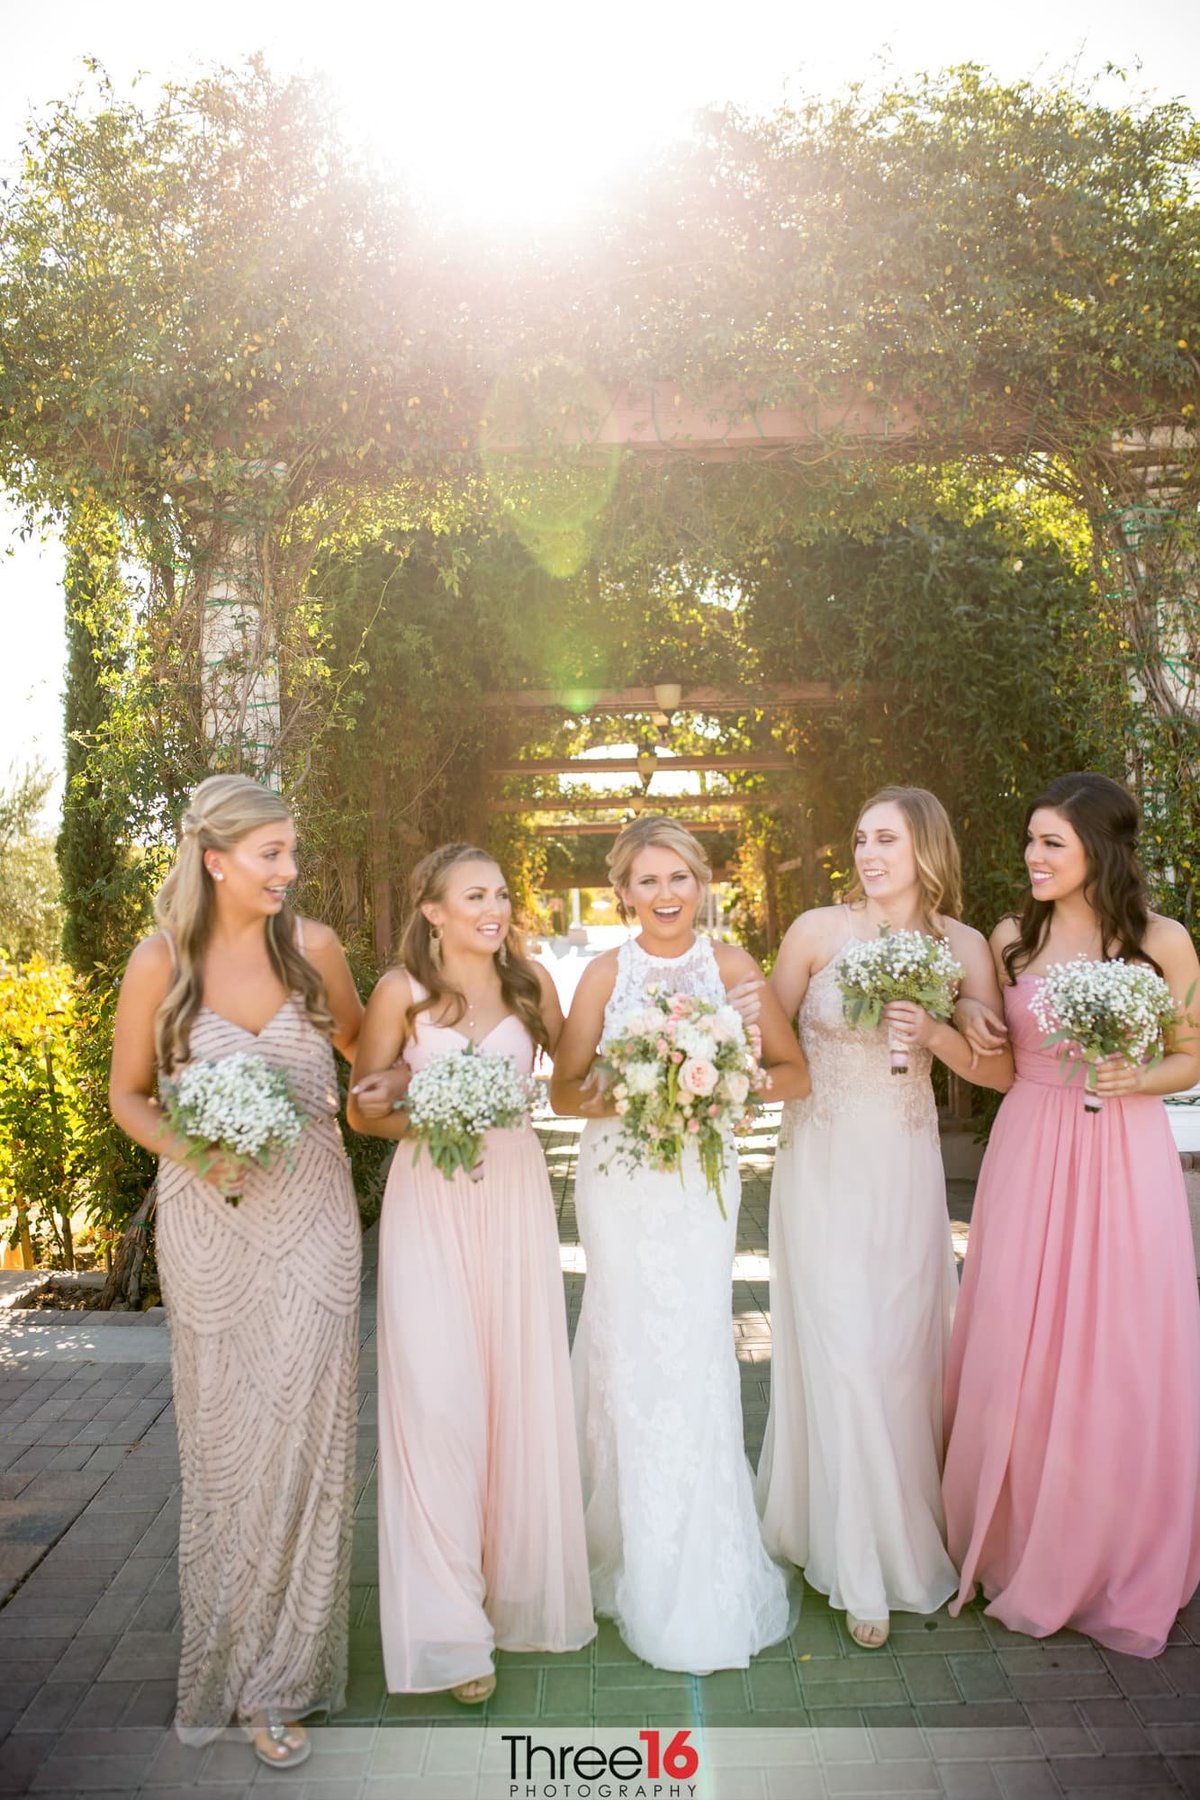 A Bride and her Bridesmaids